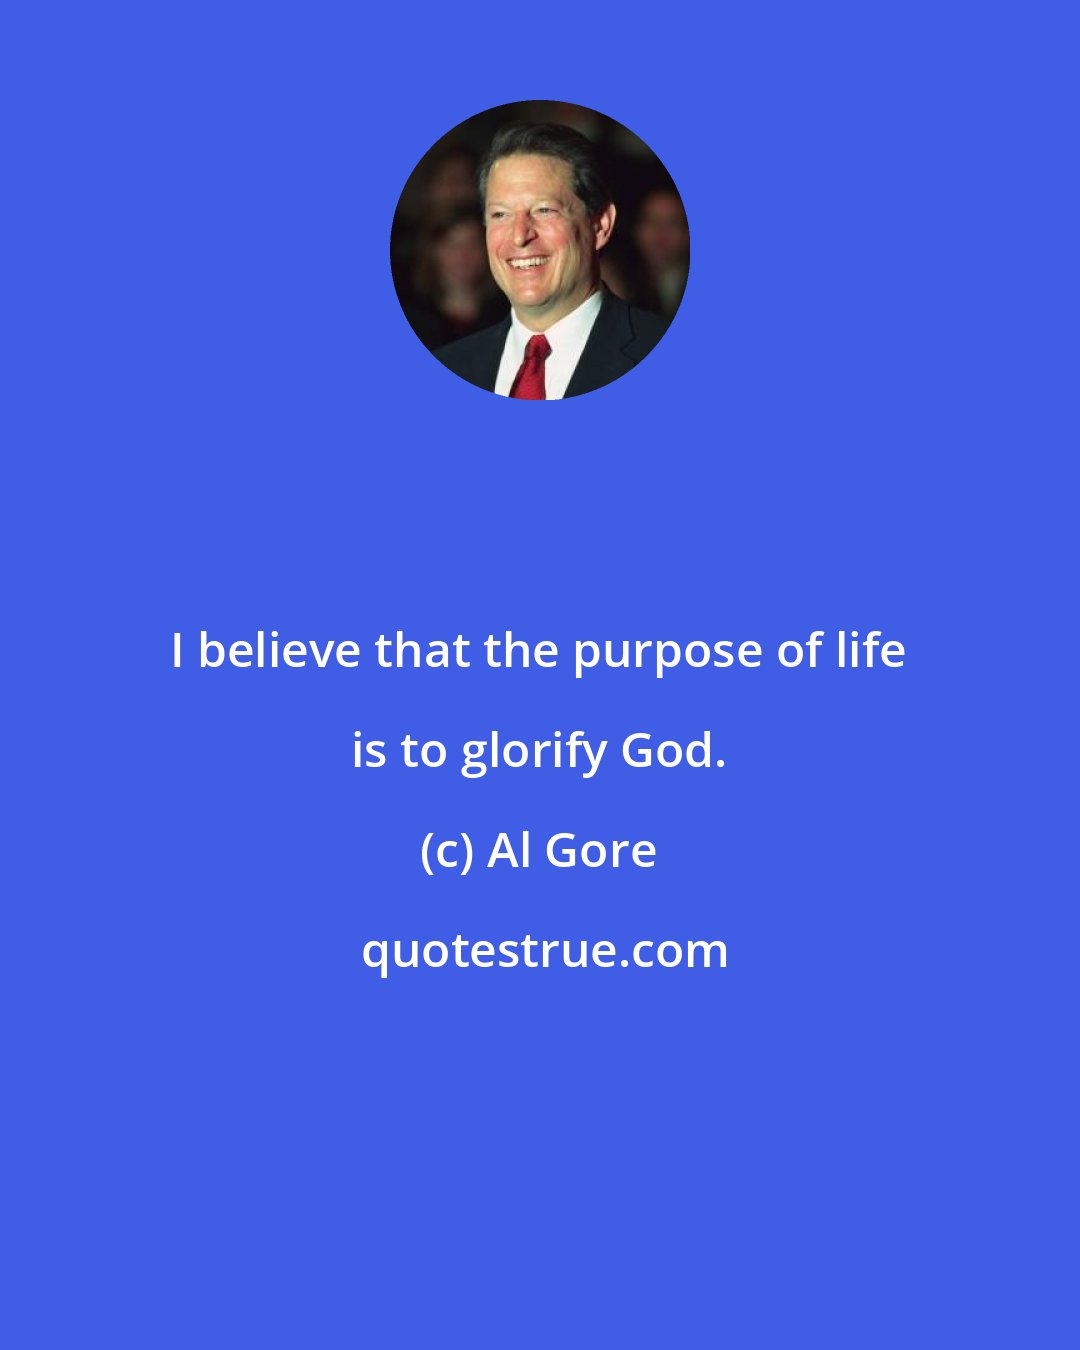 Al Gore: I believe that the purpose of life is to glorify God.